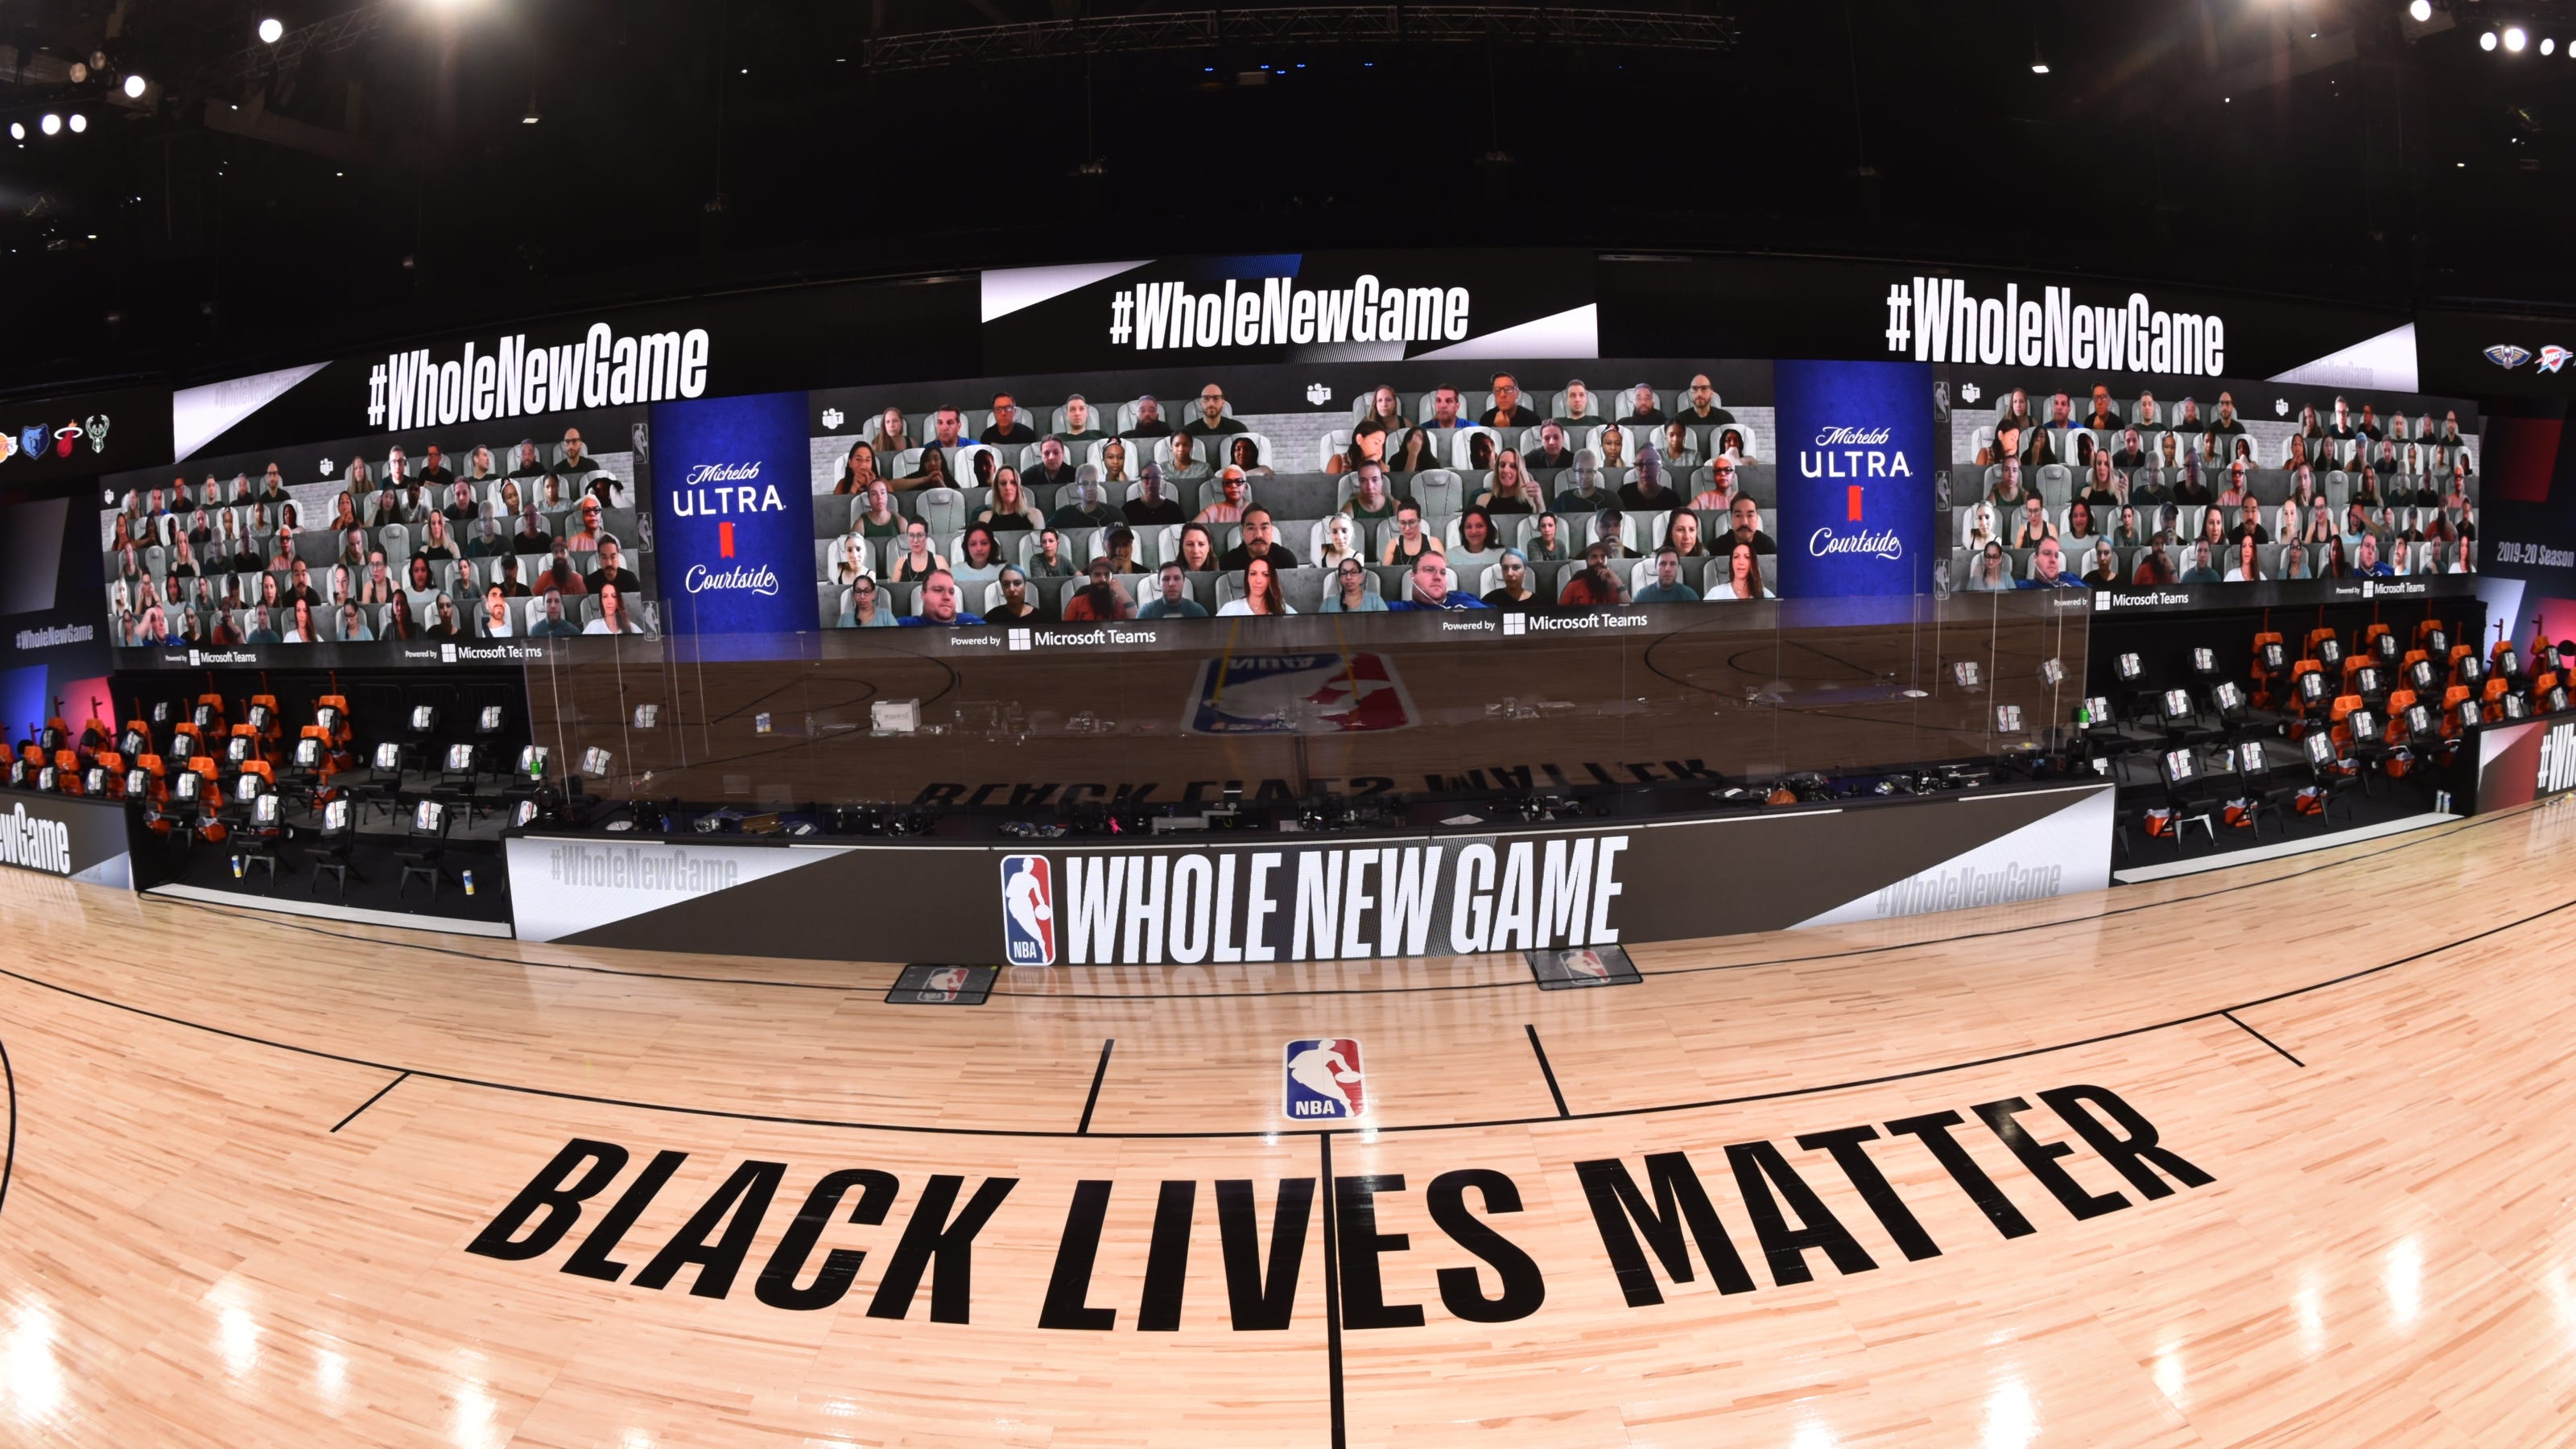 Nba Virtual Fans Will Be Seen On Giant Video Boards During Games